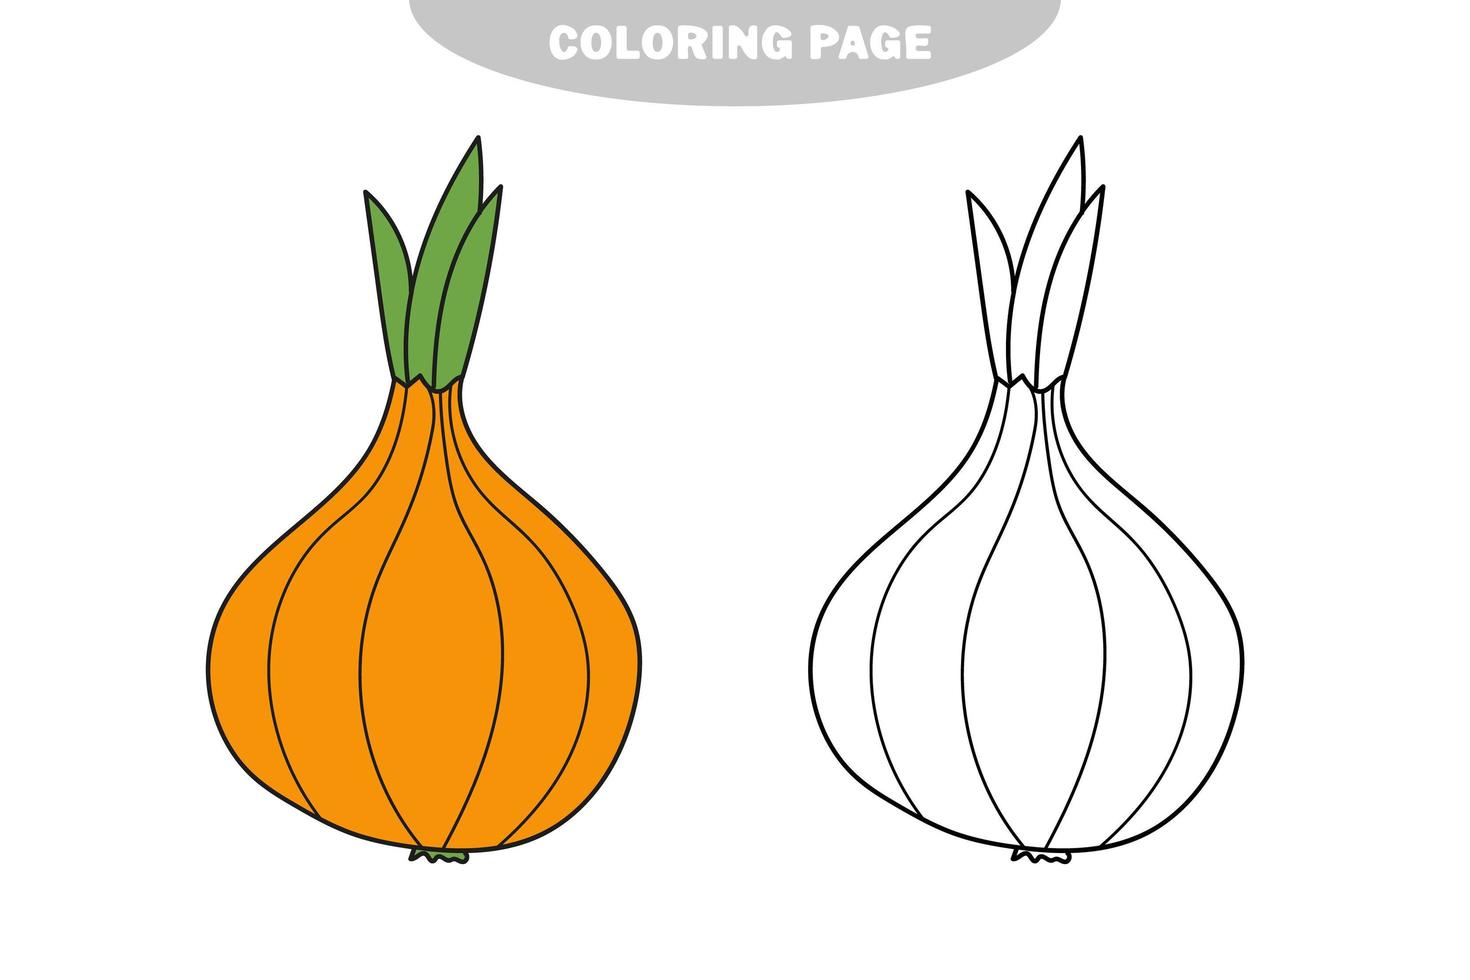 Simple coloring page. Onion - line art. Vegetables vector